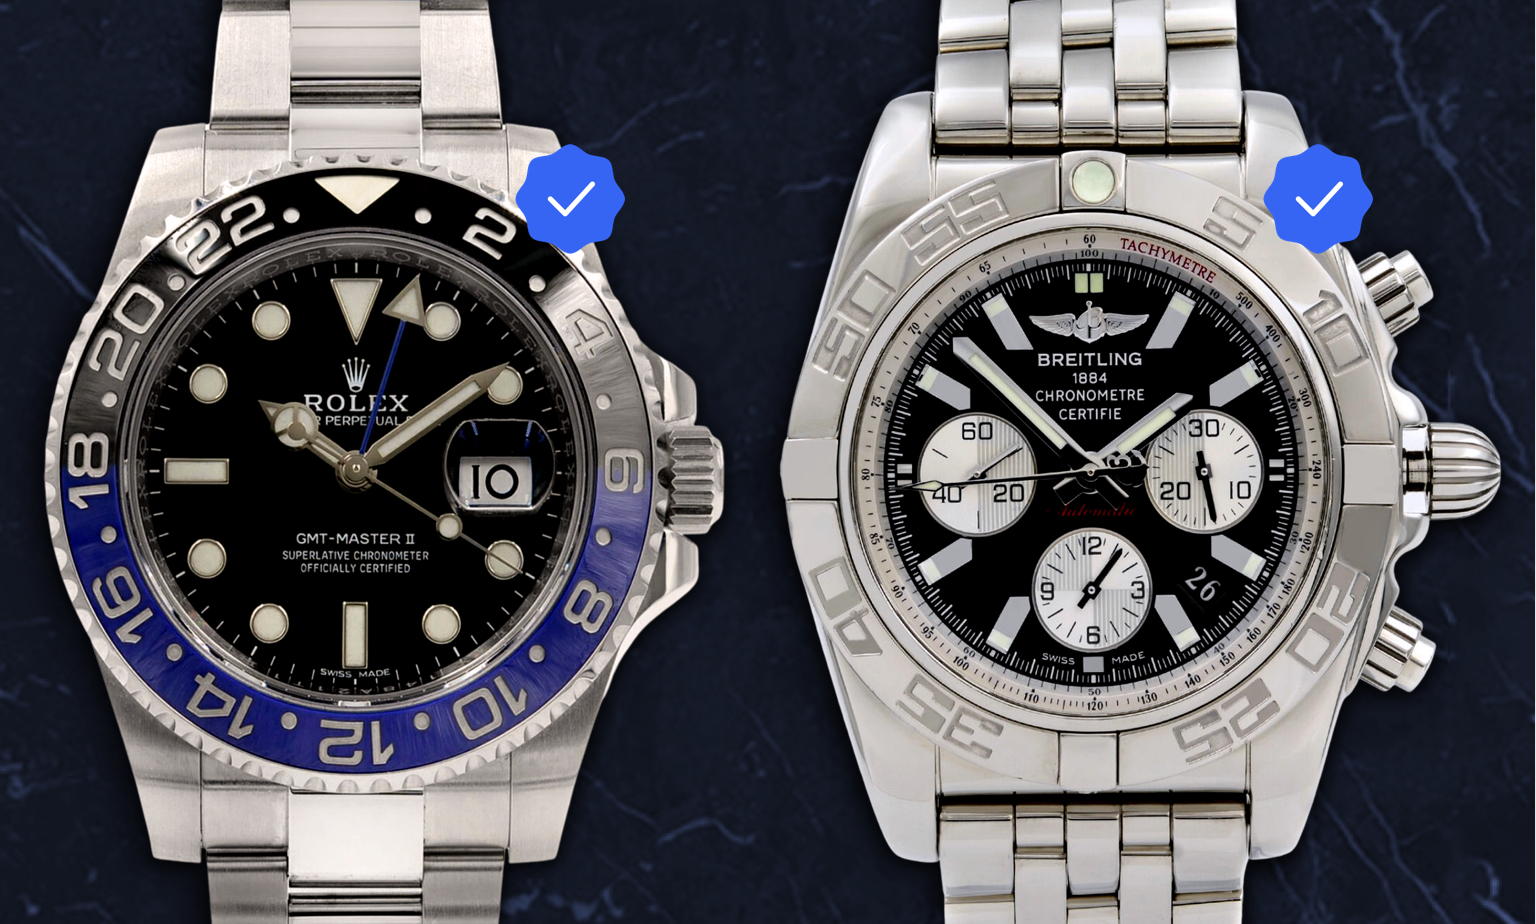 eBay Sale: $300 Off Select Watches Like These And Others Costing $2,000+